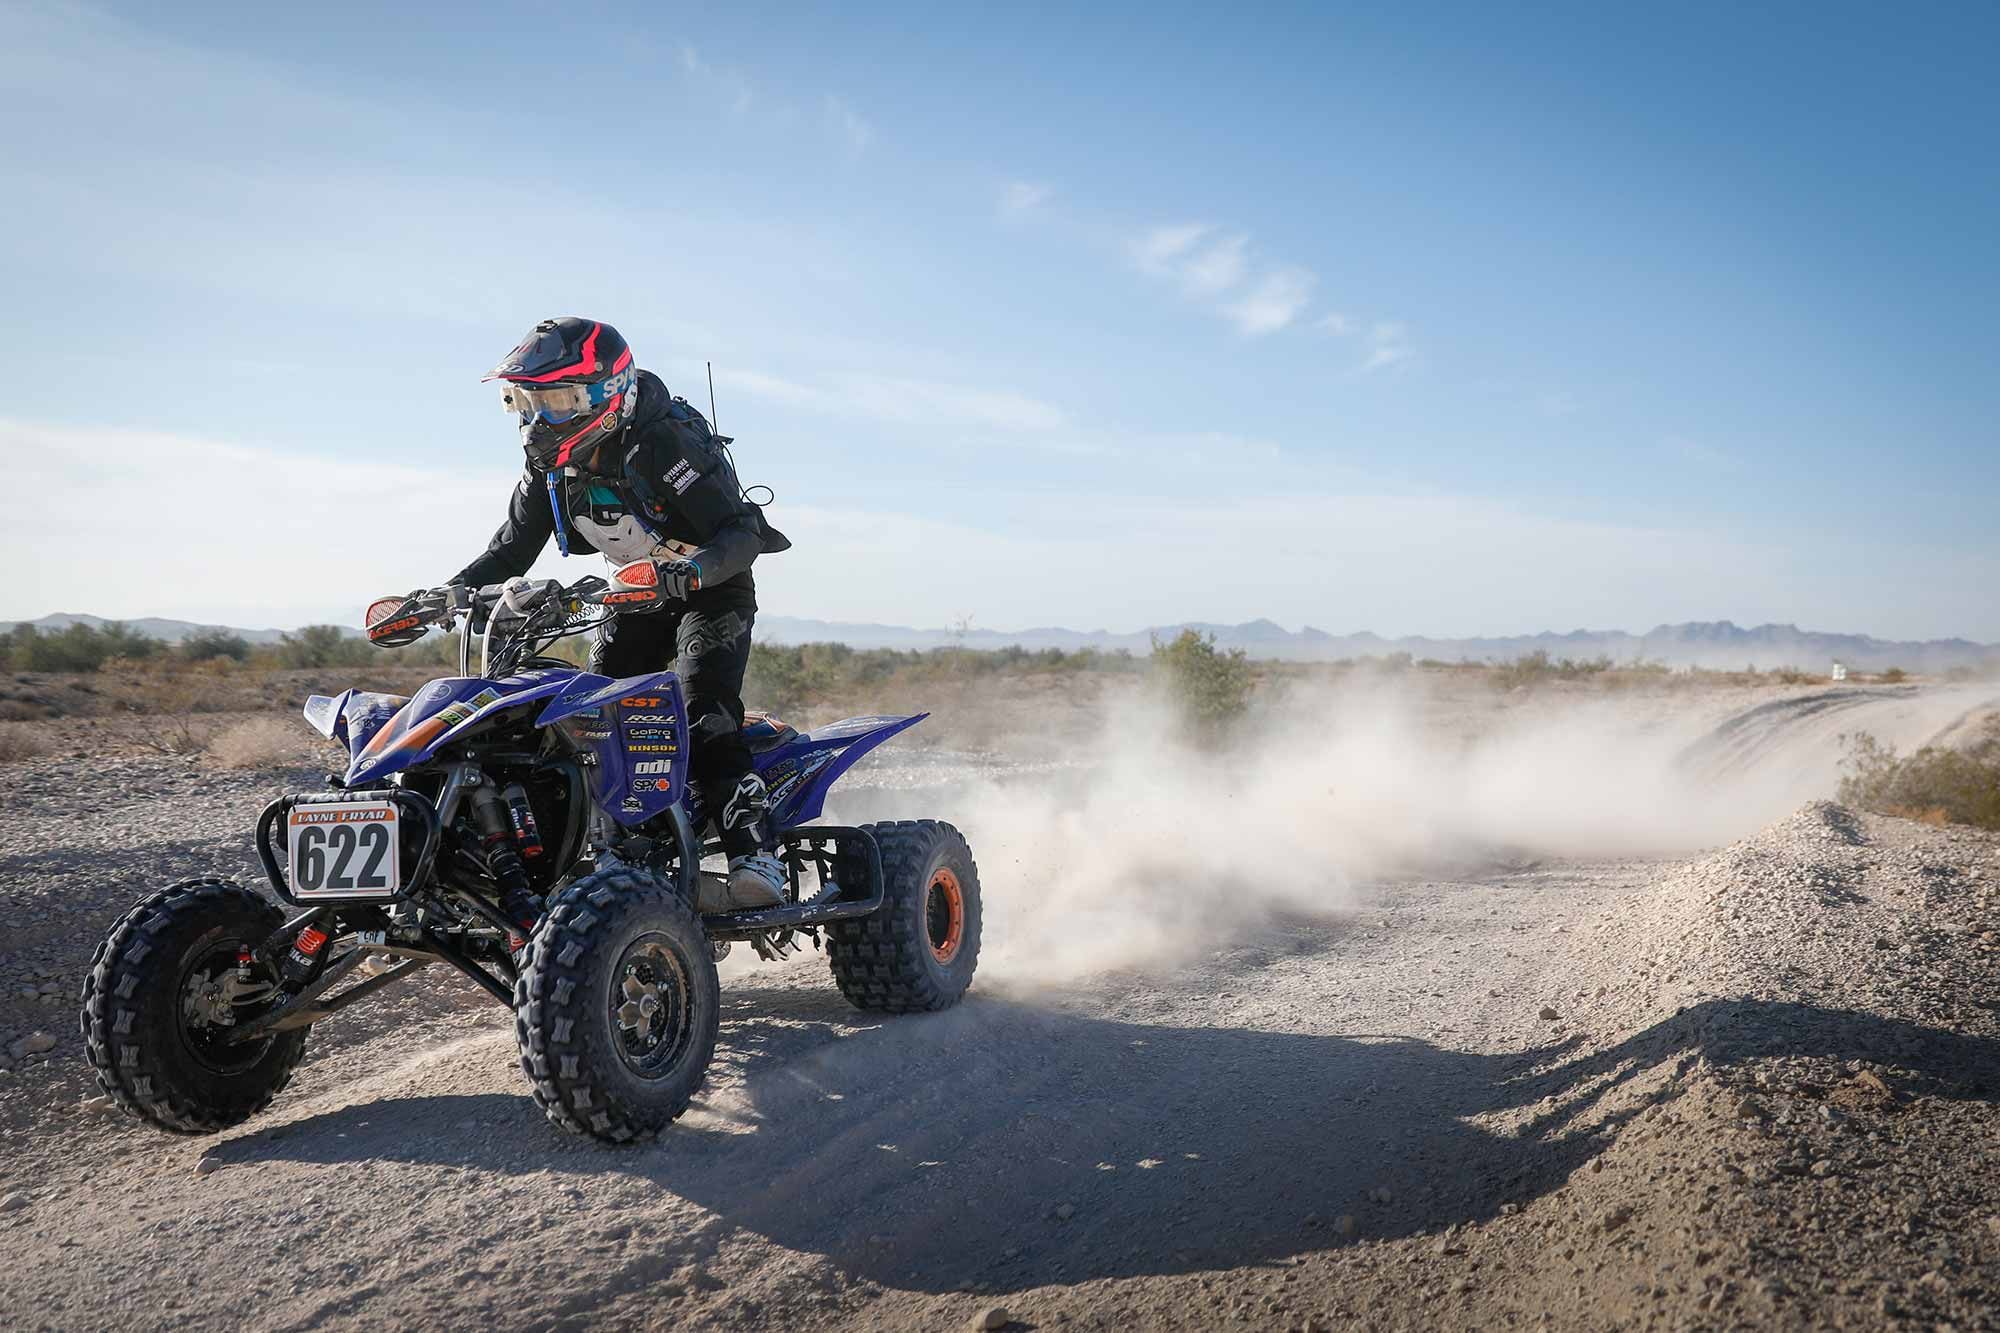 Layne Fryar of Surprise, Arizona, on his No. 622 Yamaha YFZ450R got starter points, but the 17-year-old was unable to reel in a checkered flag.